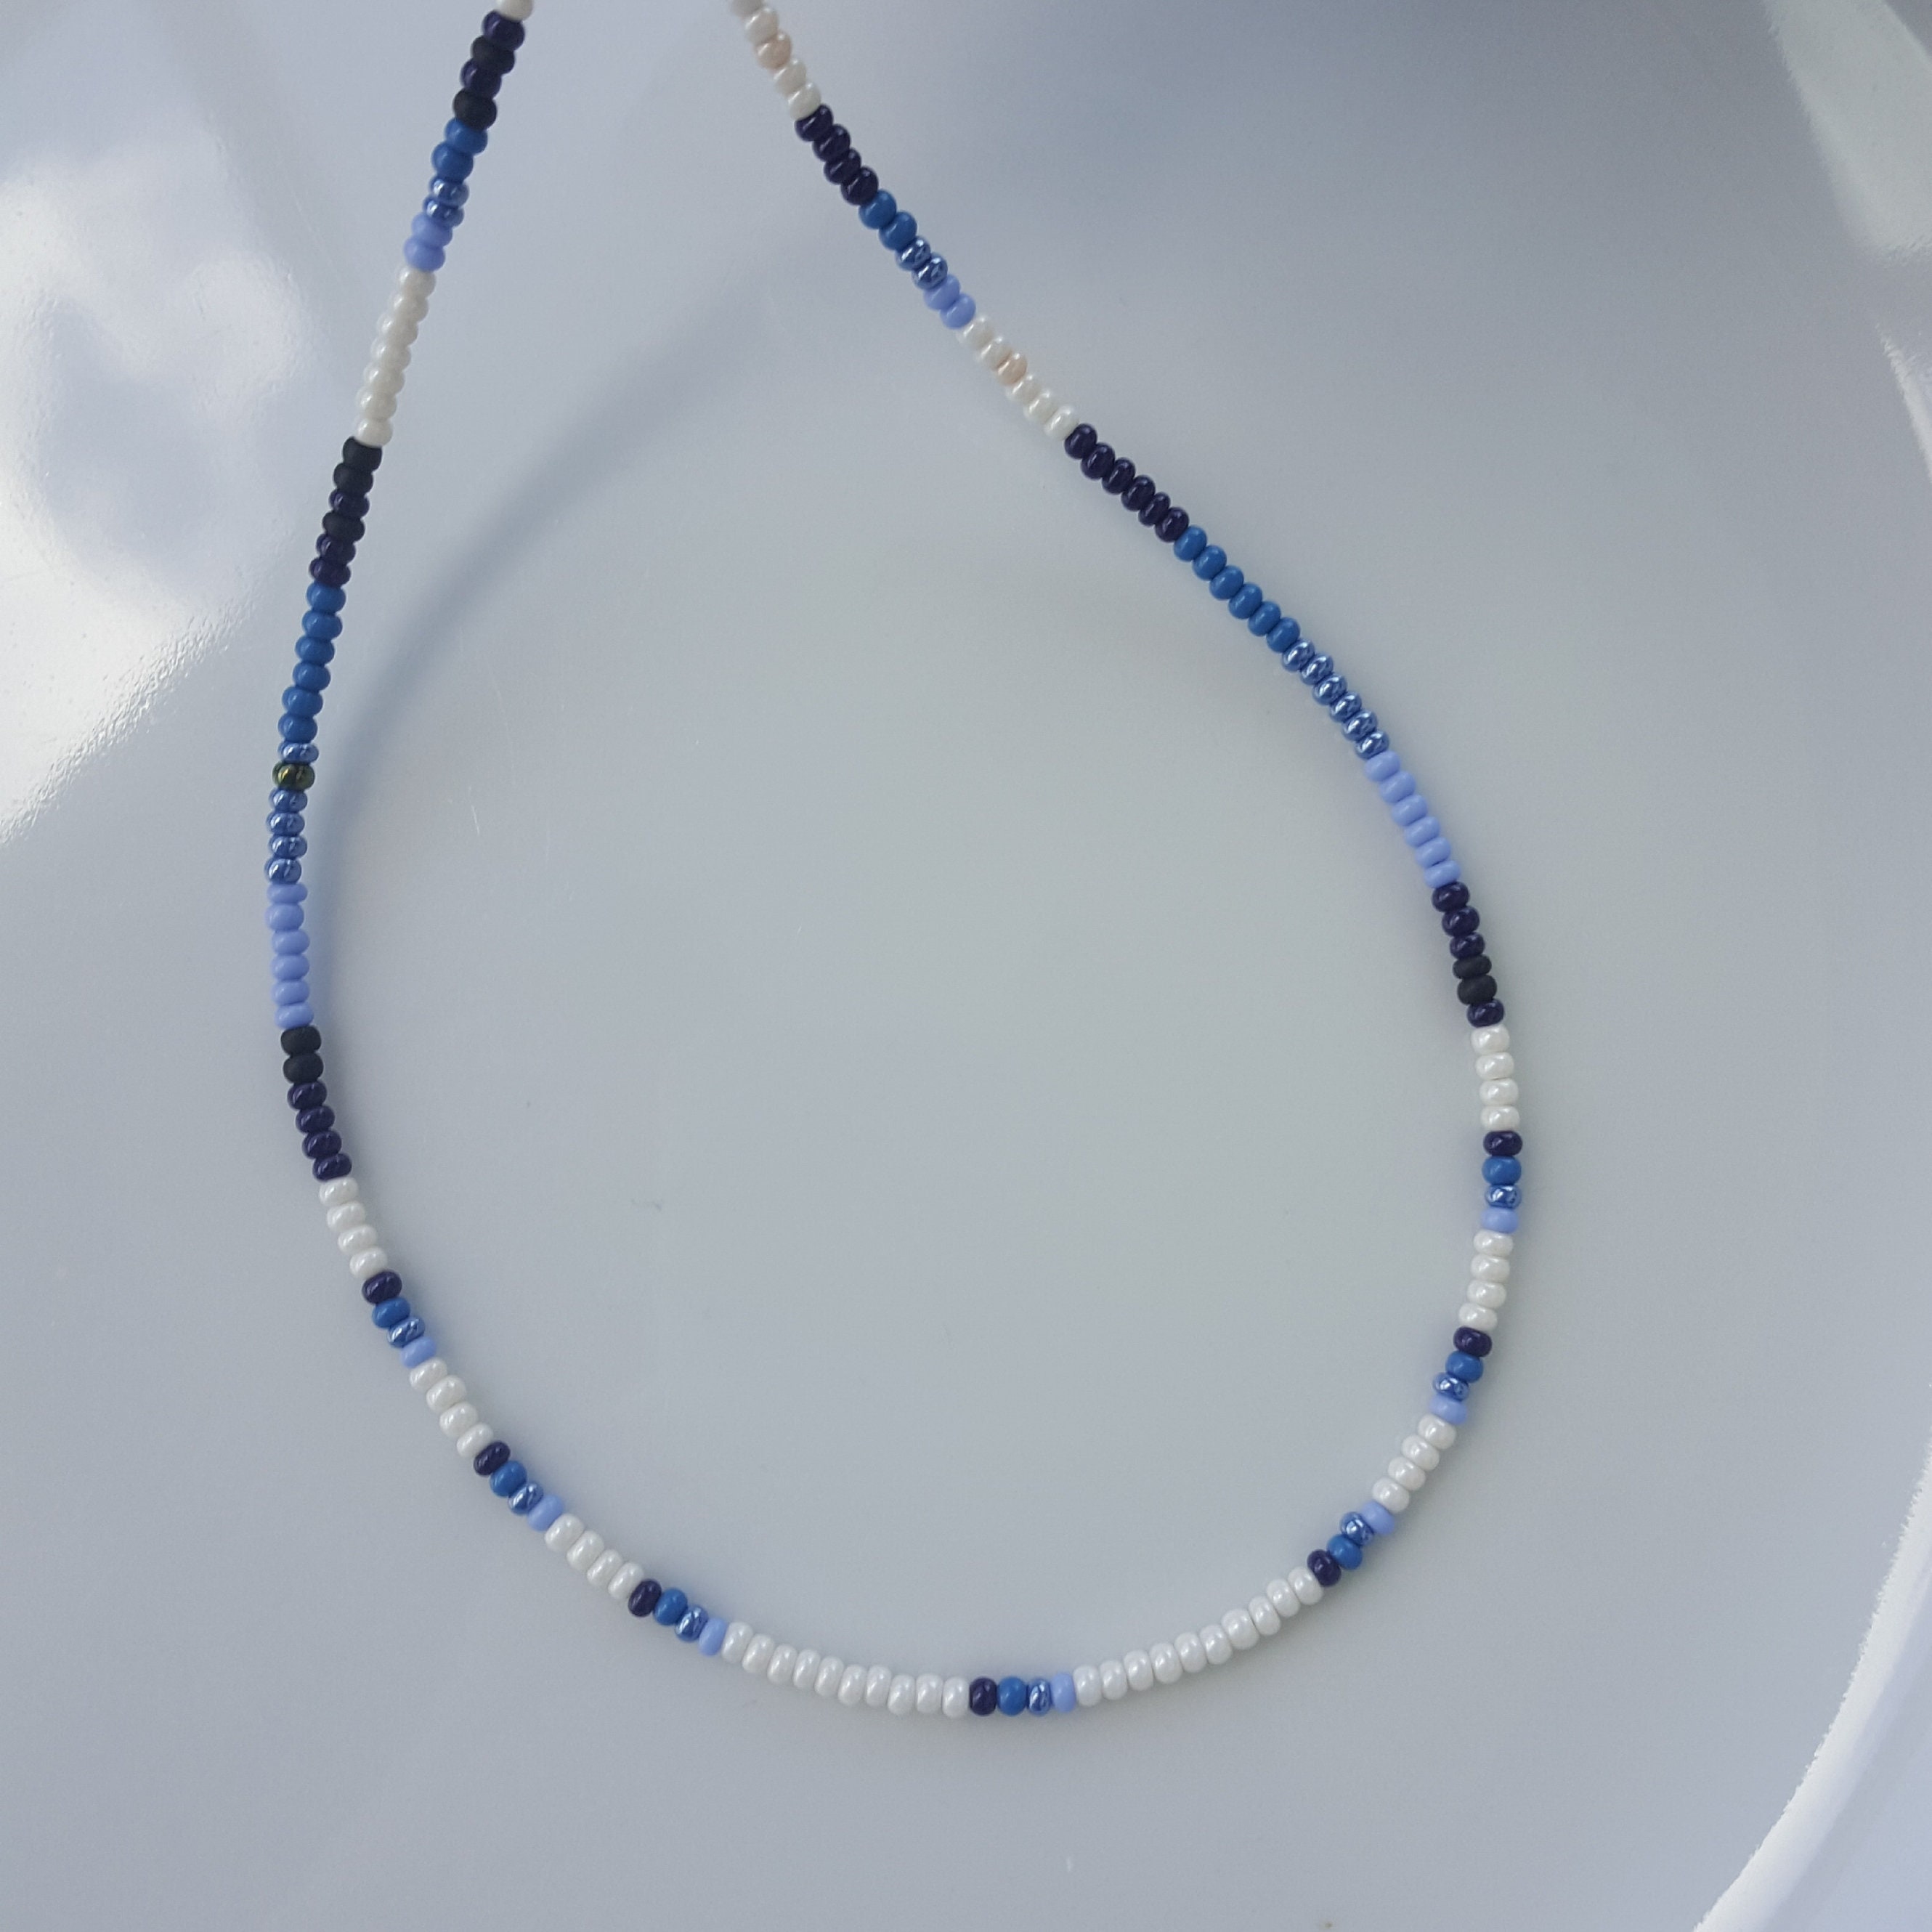 15-PERSONAL Power Mens Beaded Necklace, Handmade Lapis Lazuli Necklace, Crystal & Gemstone Black Bead Mens Choker Necklace Jewels for Gents 16 /